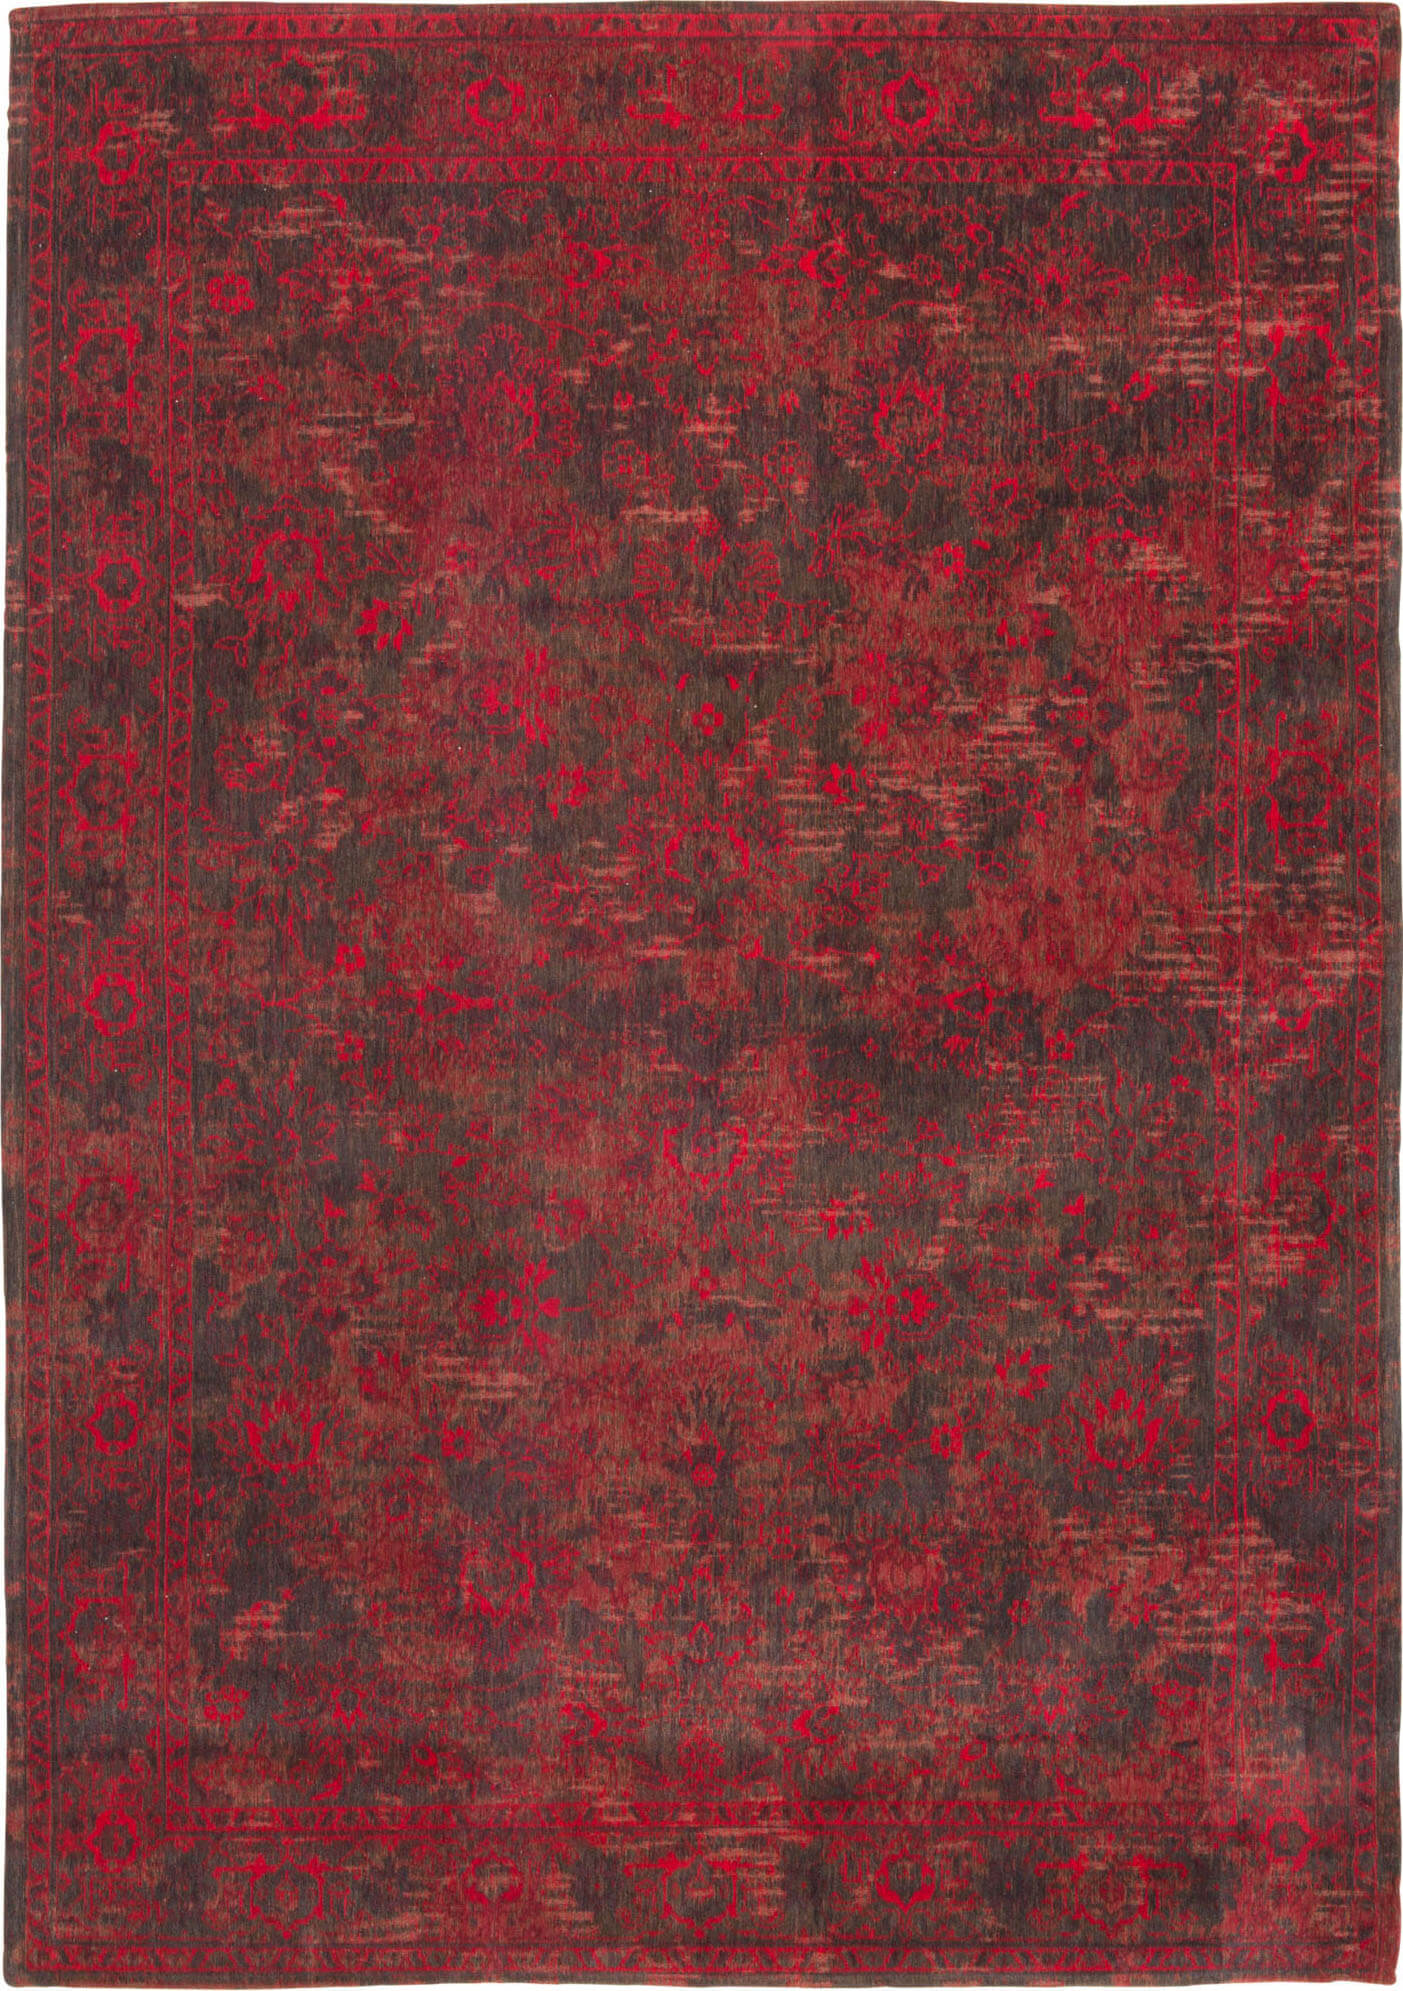 Grey Red Bright Persian Vintage Rug ☞ Size: 230 x 230 cm